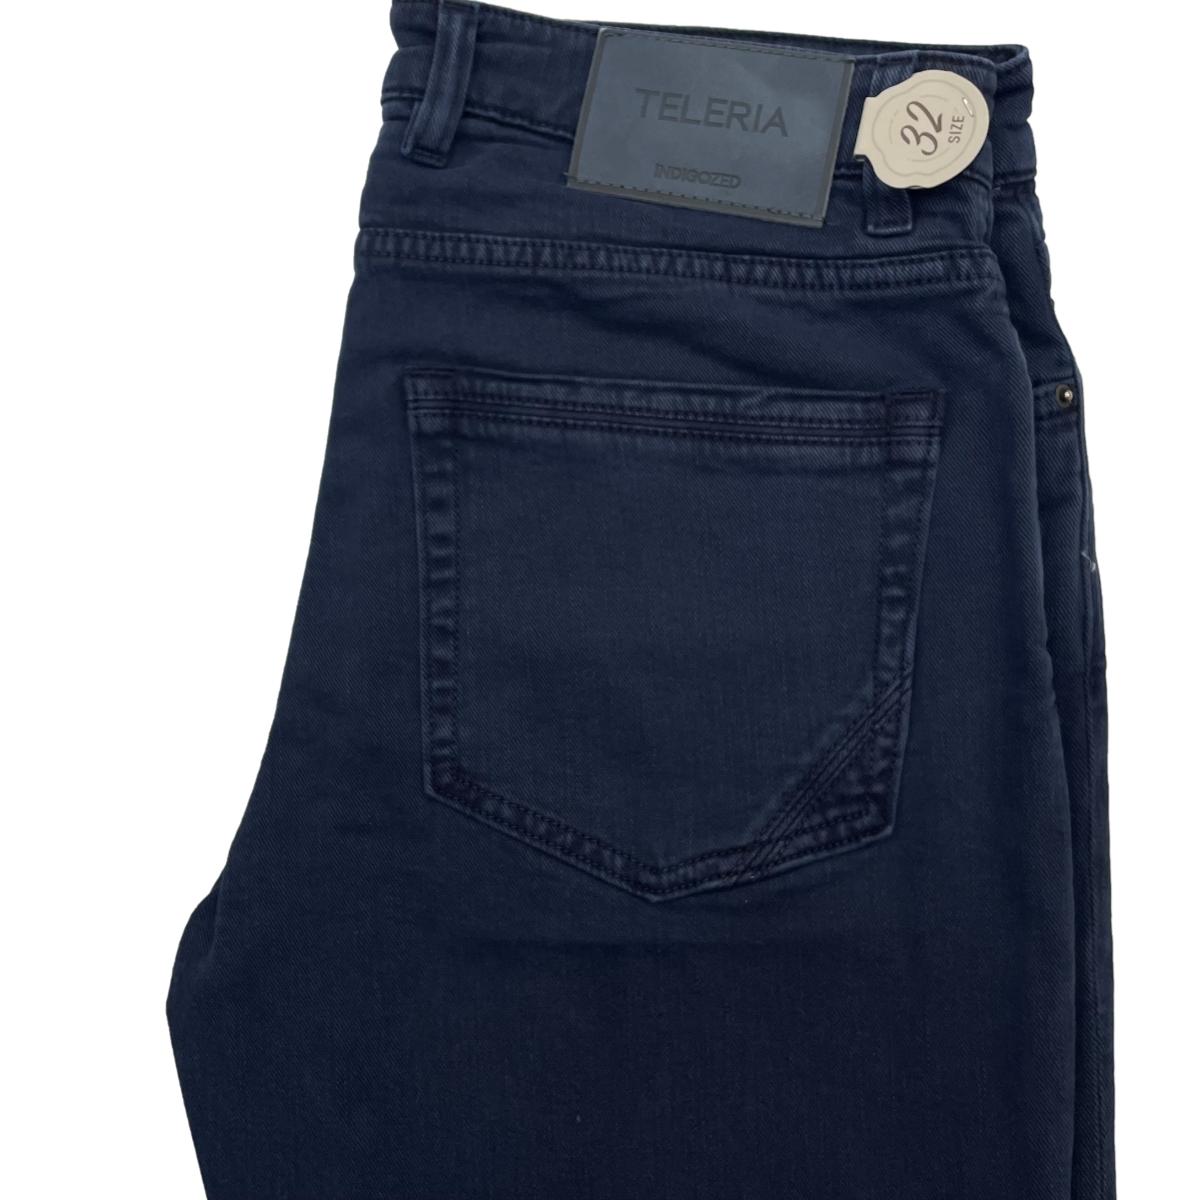 Business Casual Jeans - Family Britches